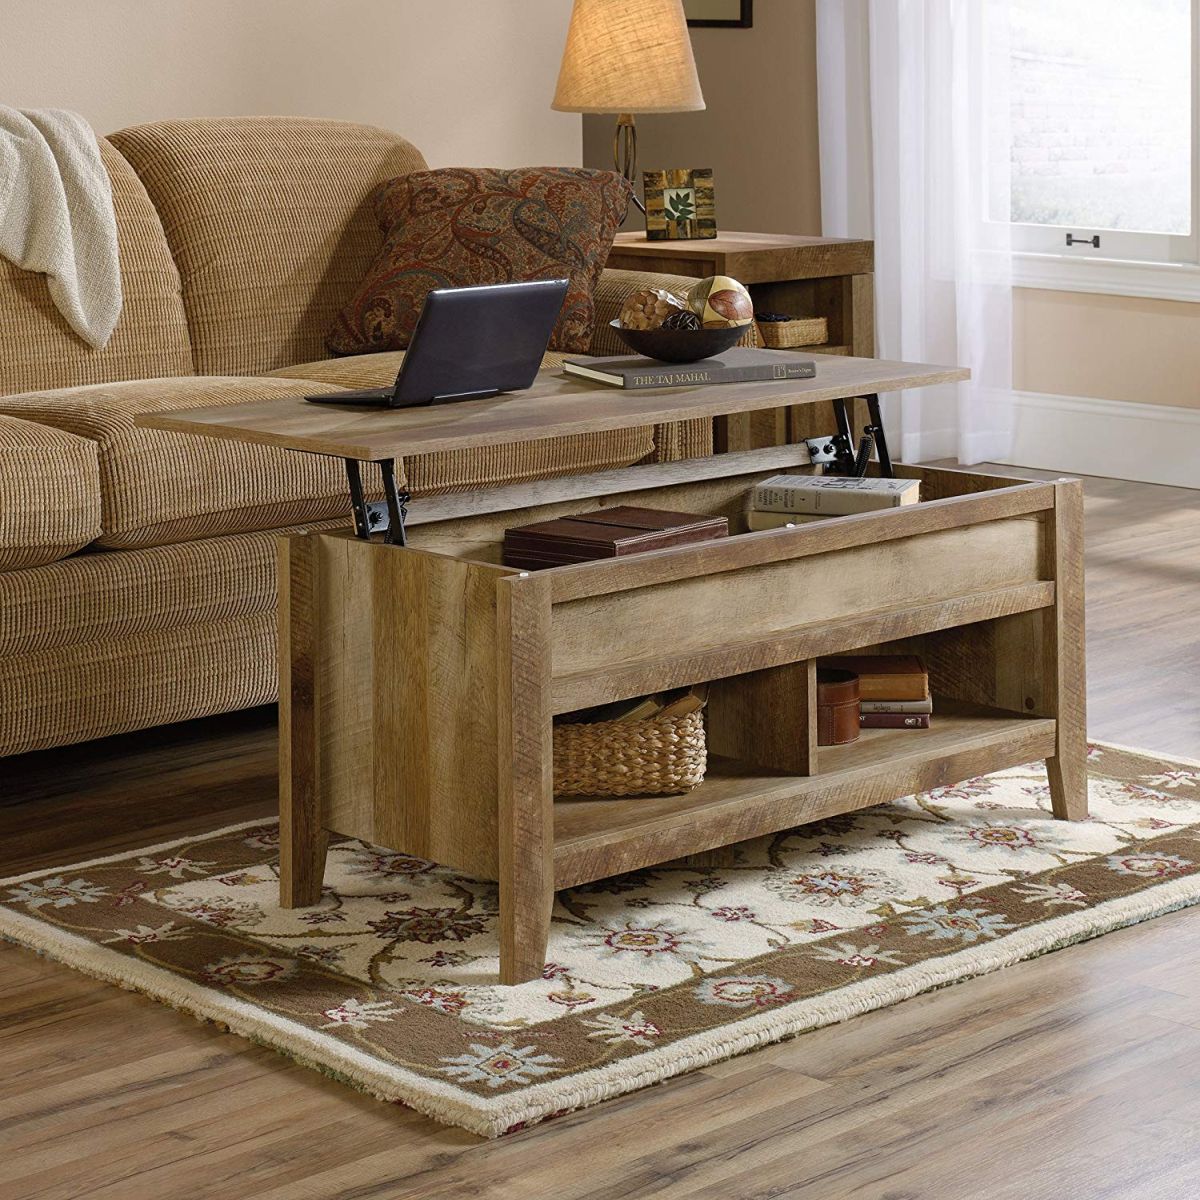 Lift Top Coffee Table Ideas With Iamges